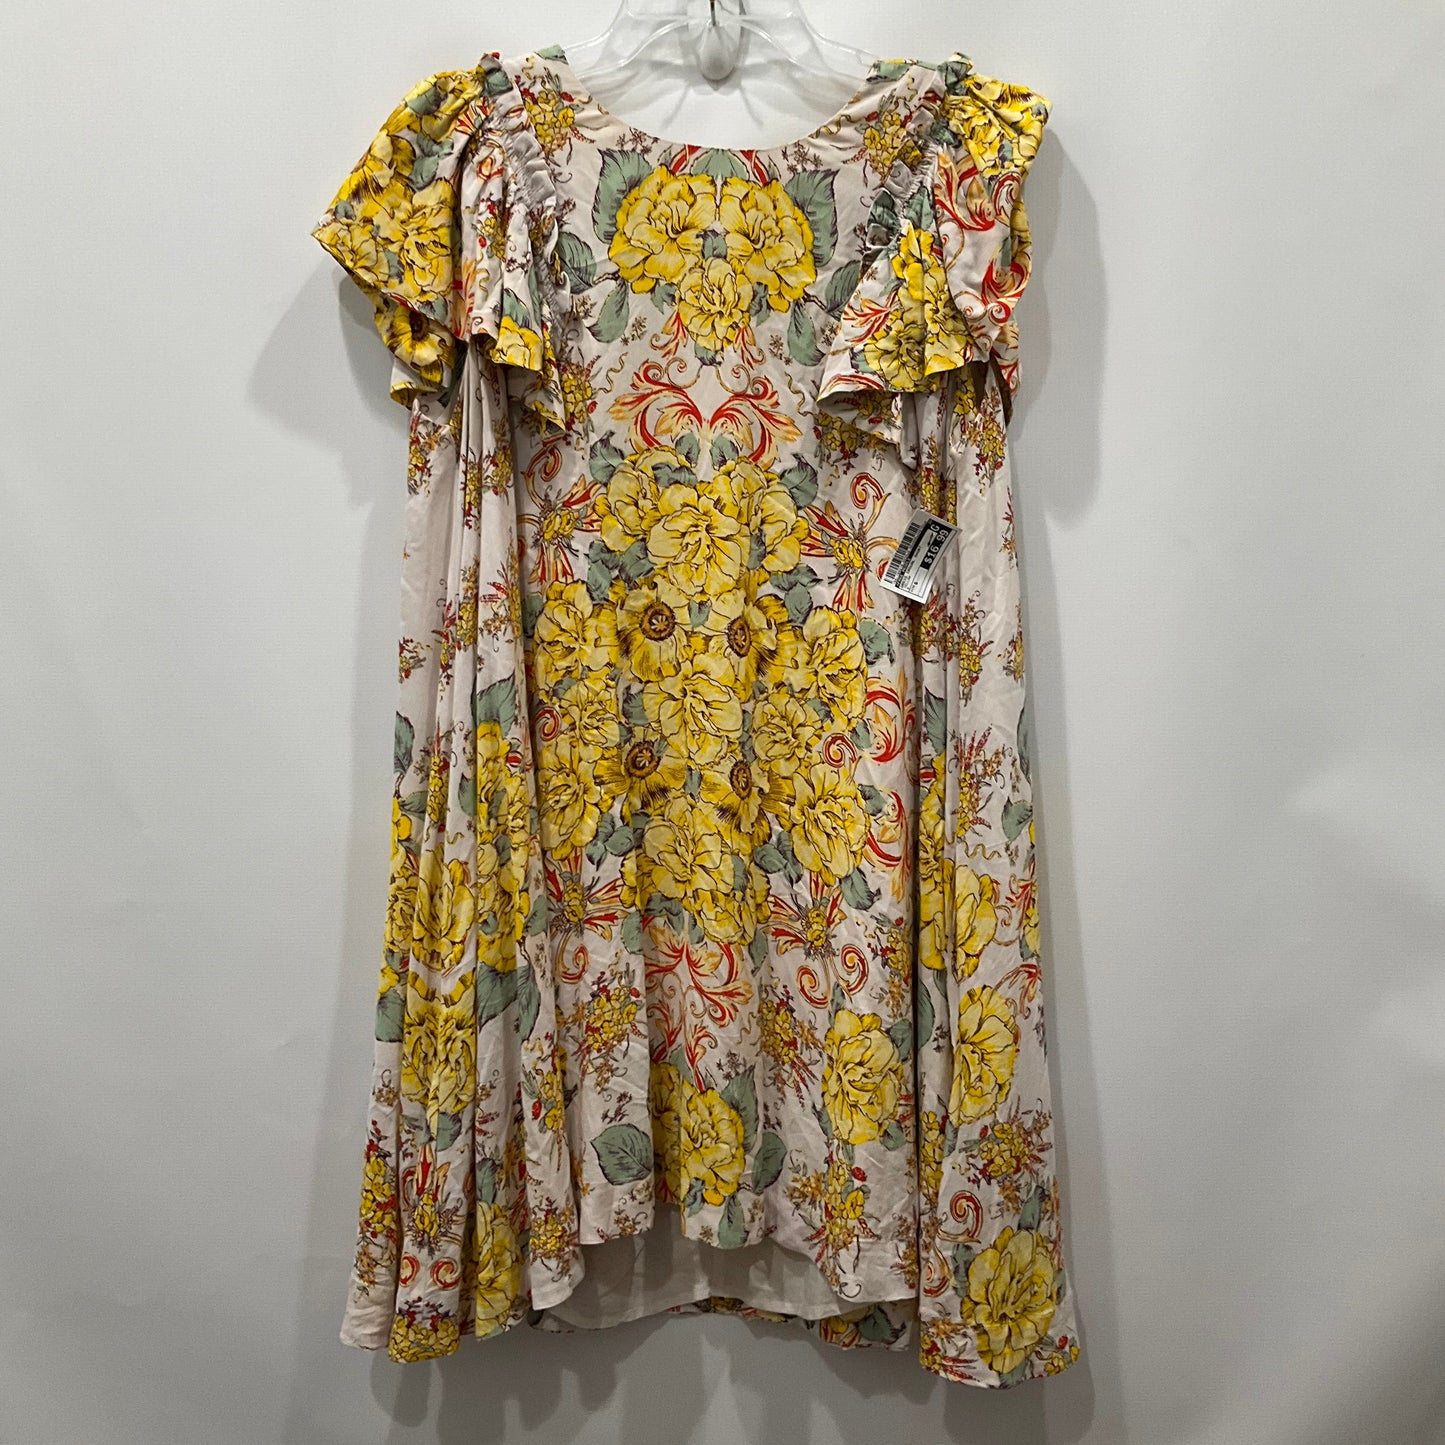 Yellow Dress Casual Short Free People, Size S